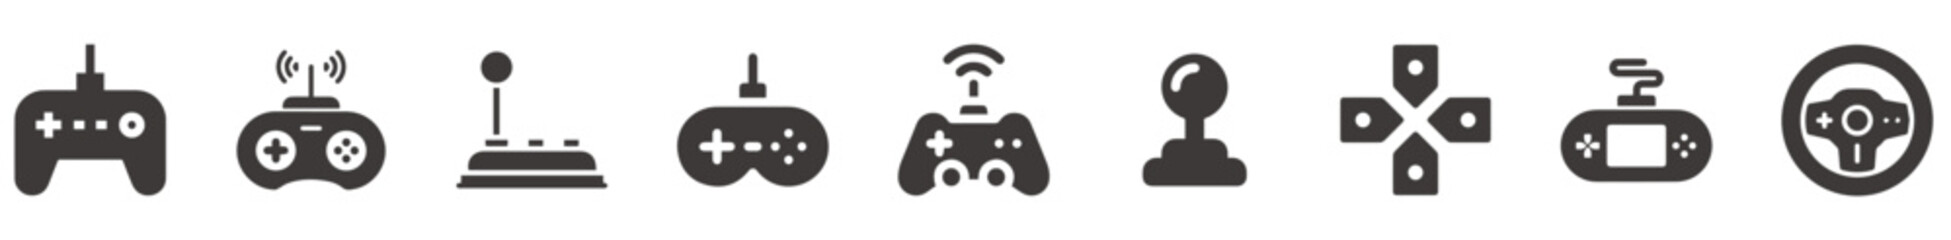 Video game icons set. Vector icons of video game controllers.